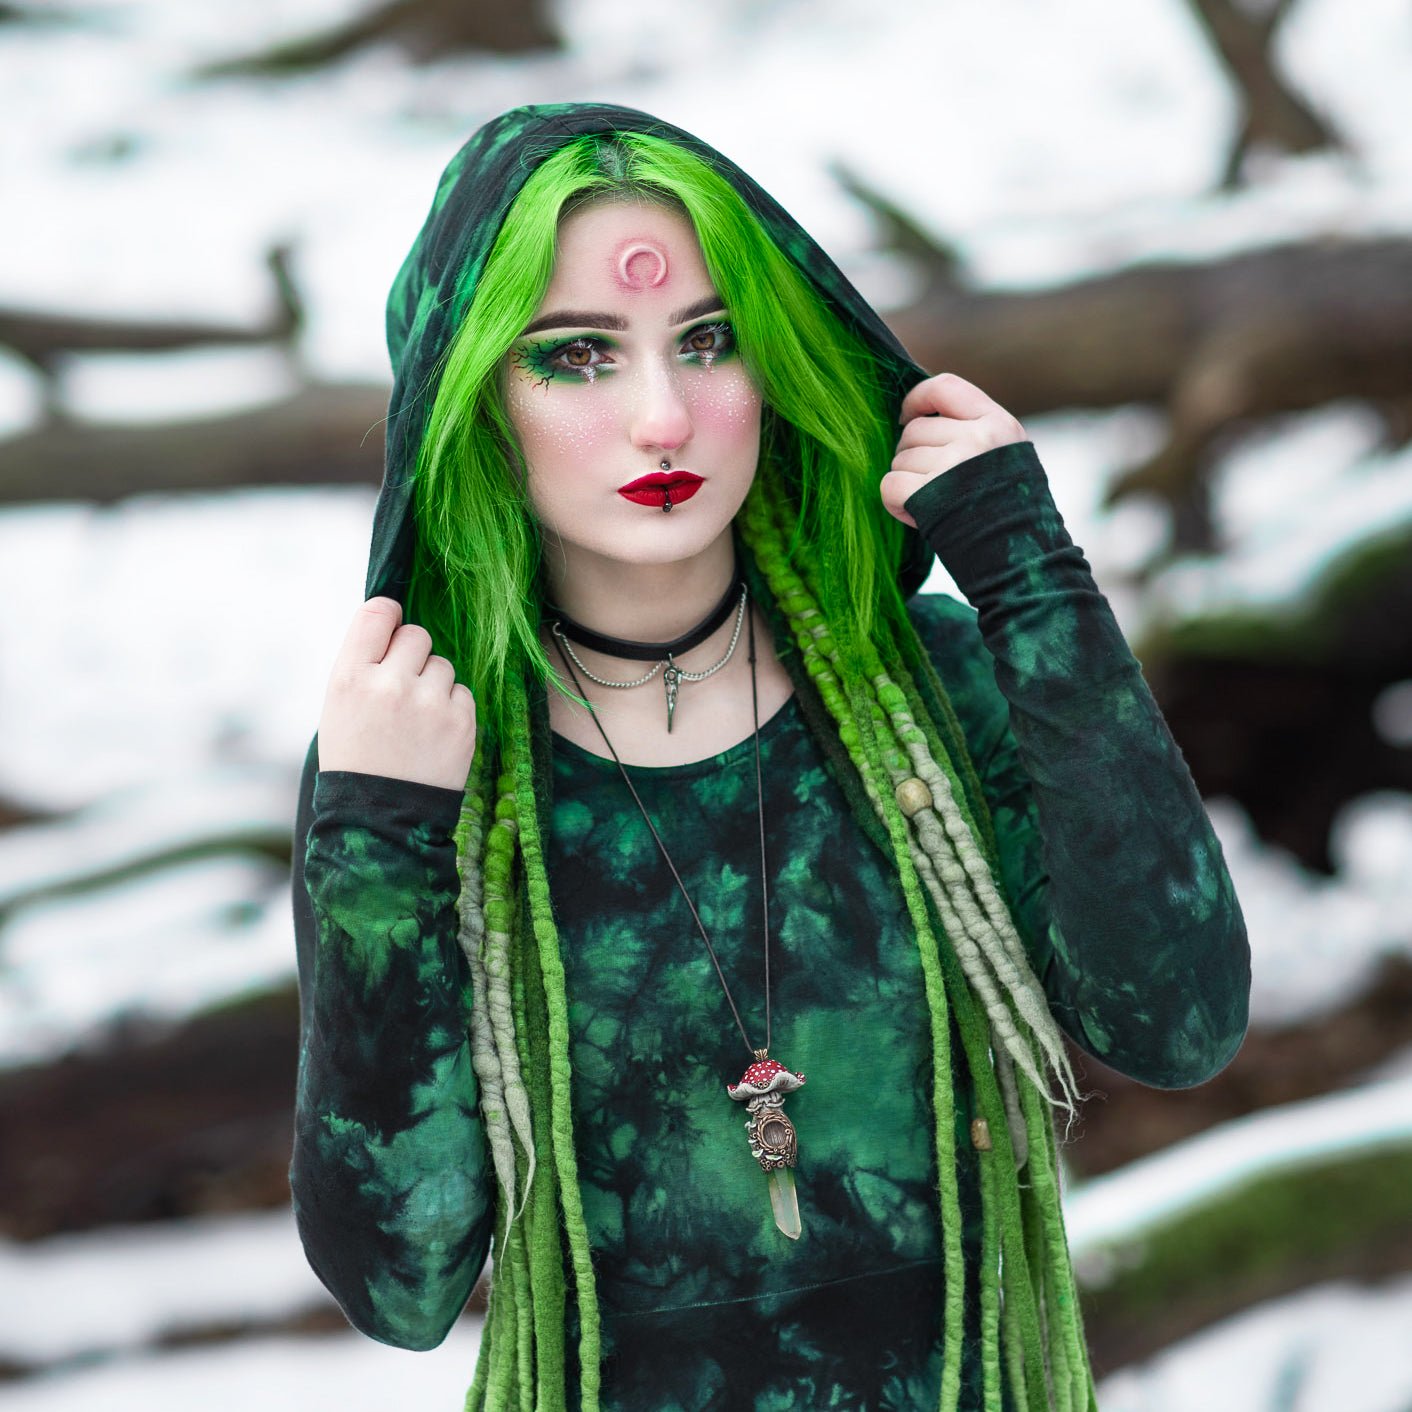 Woman with green hair wearing a small moon prosthetic on her forehead